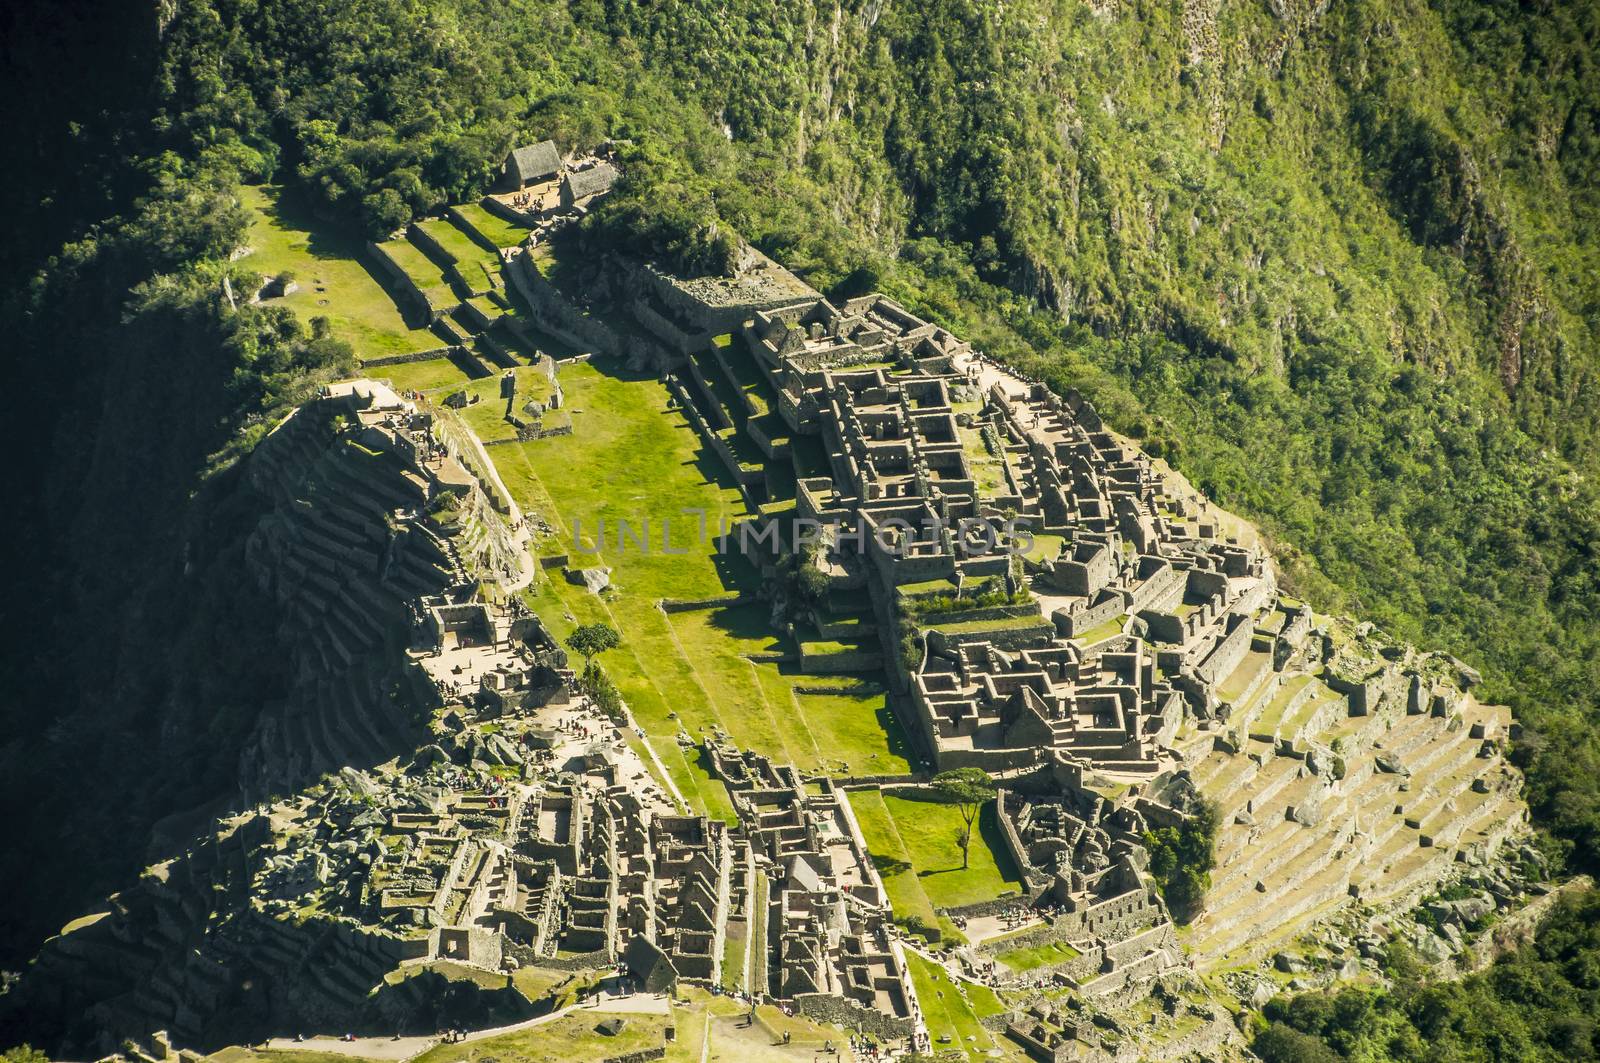 Machu Picchufrom above view in early morning by rigamondis